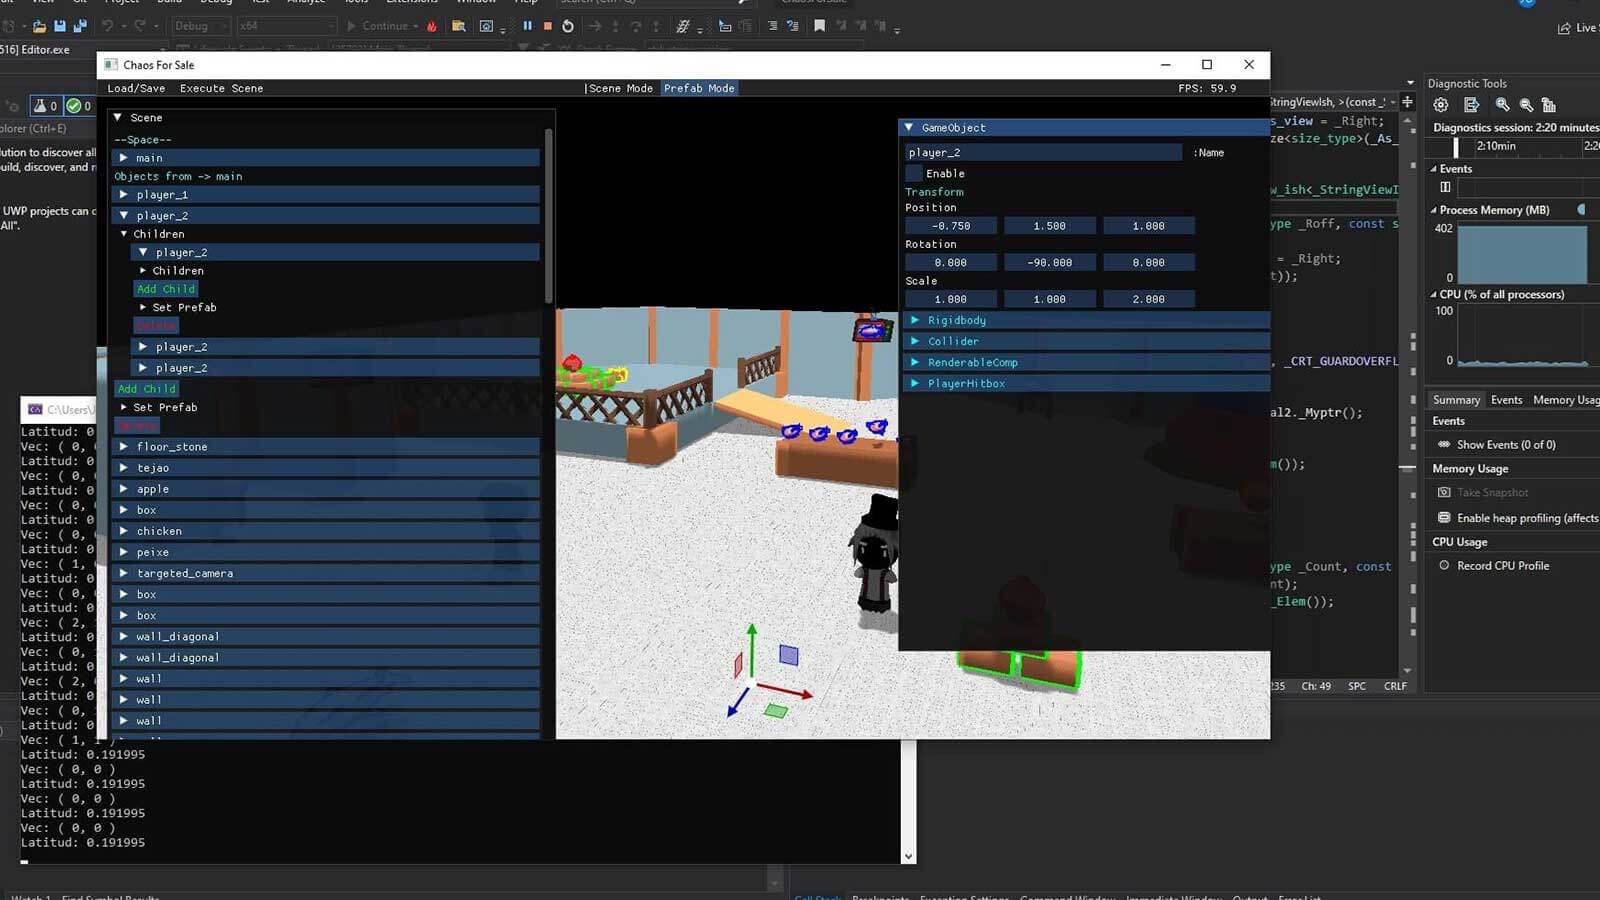 Engine and editor concept from Chaos For Sale, with Visual Studio in the background, highlighting the behind-the-scenes development process.